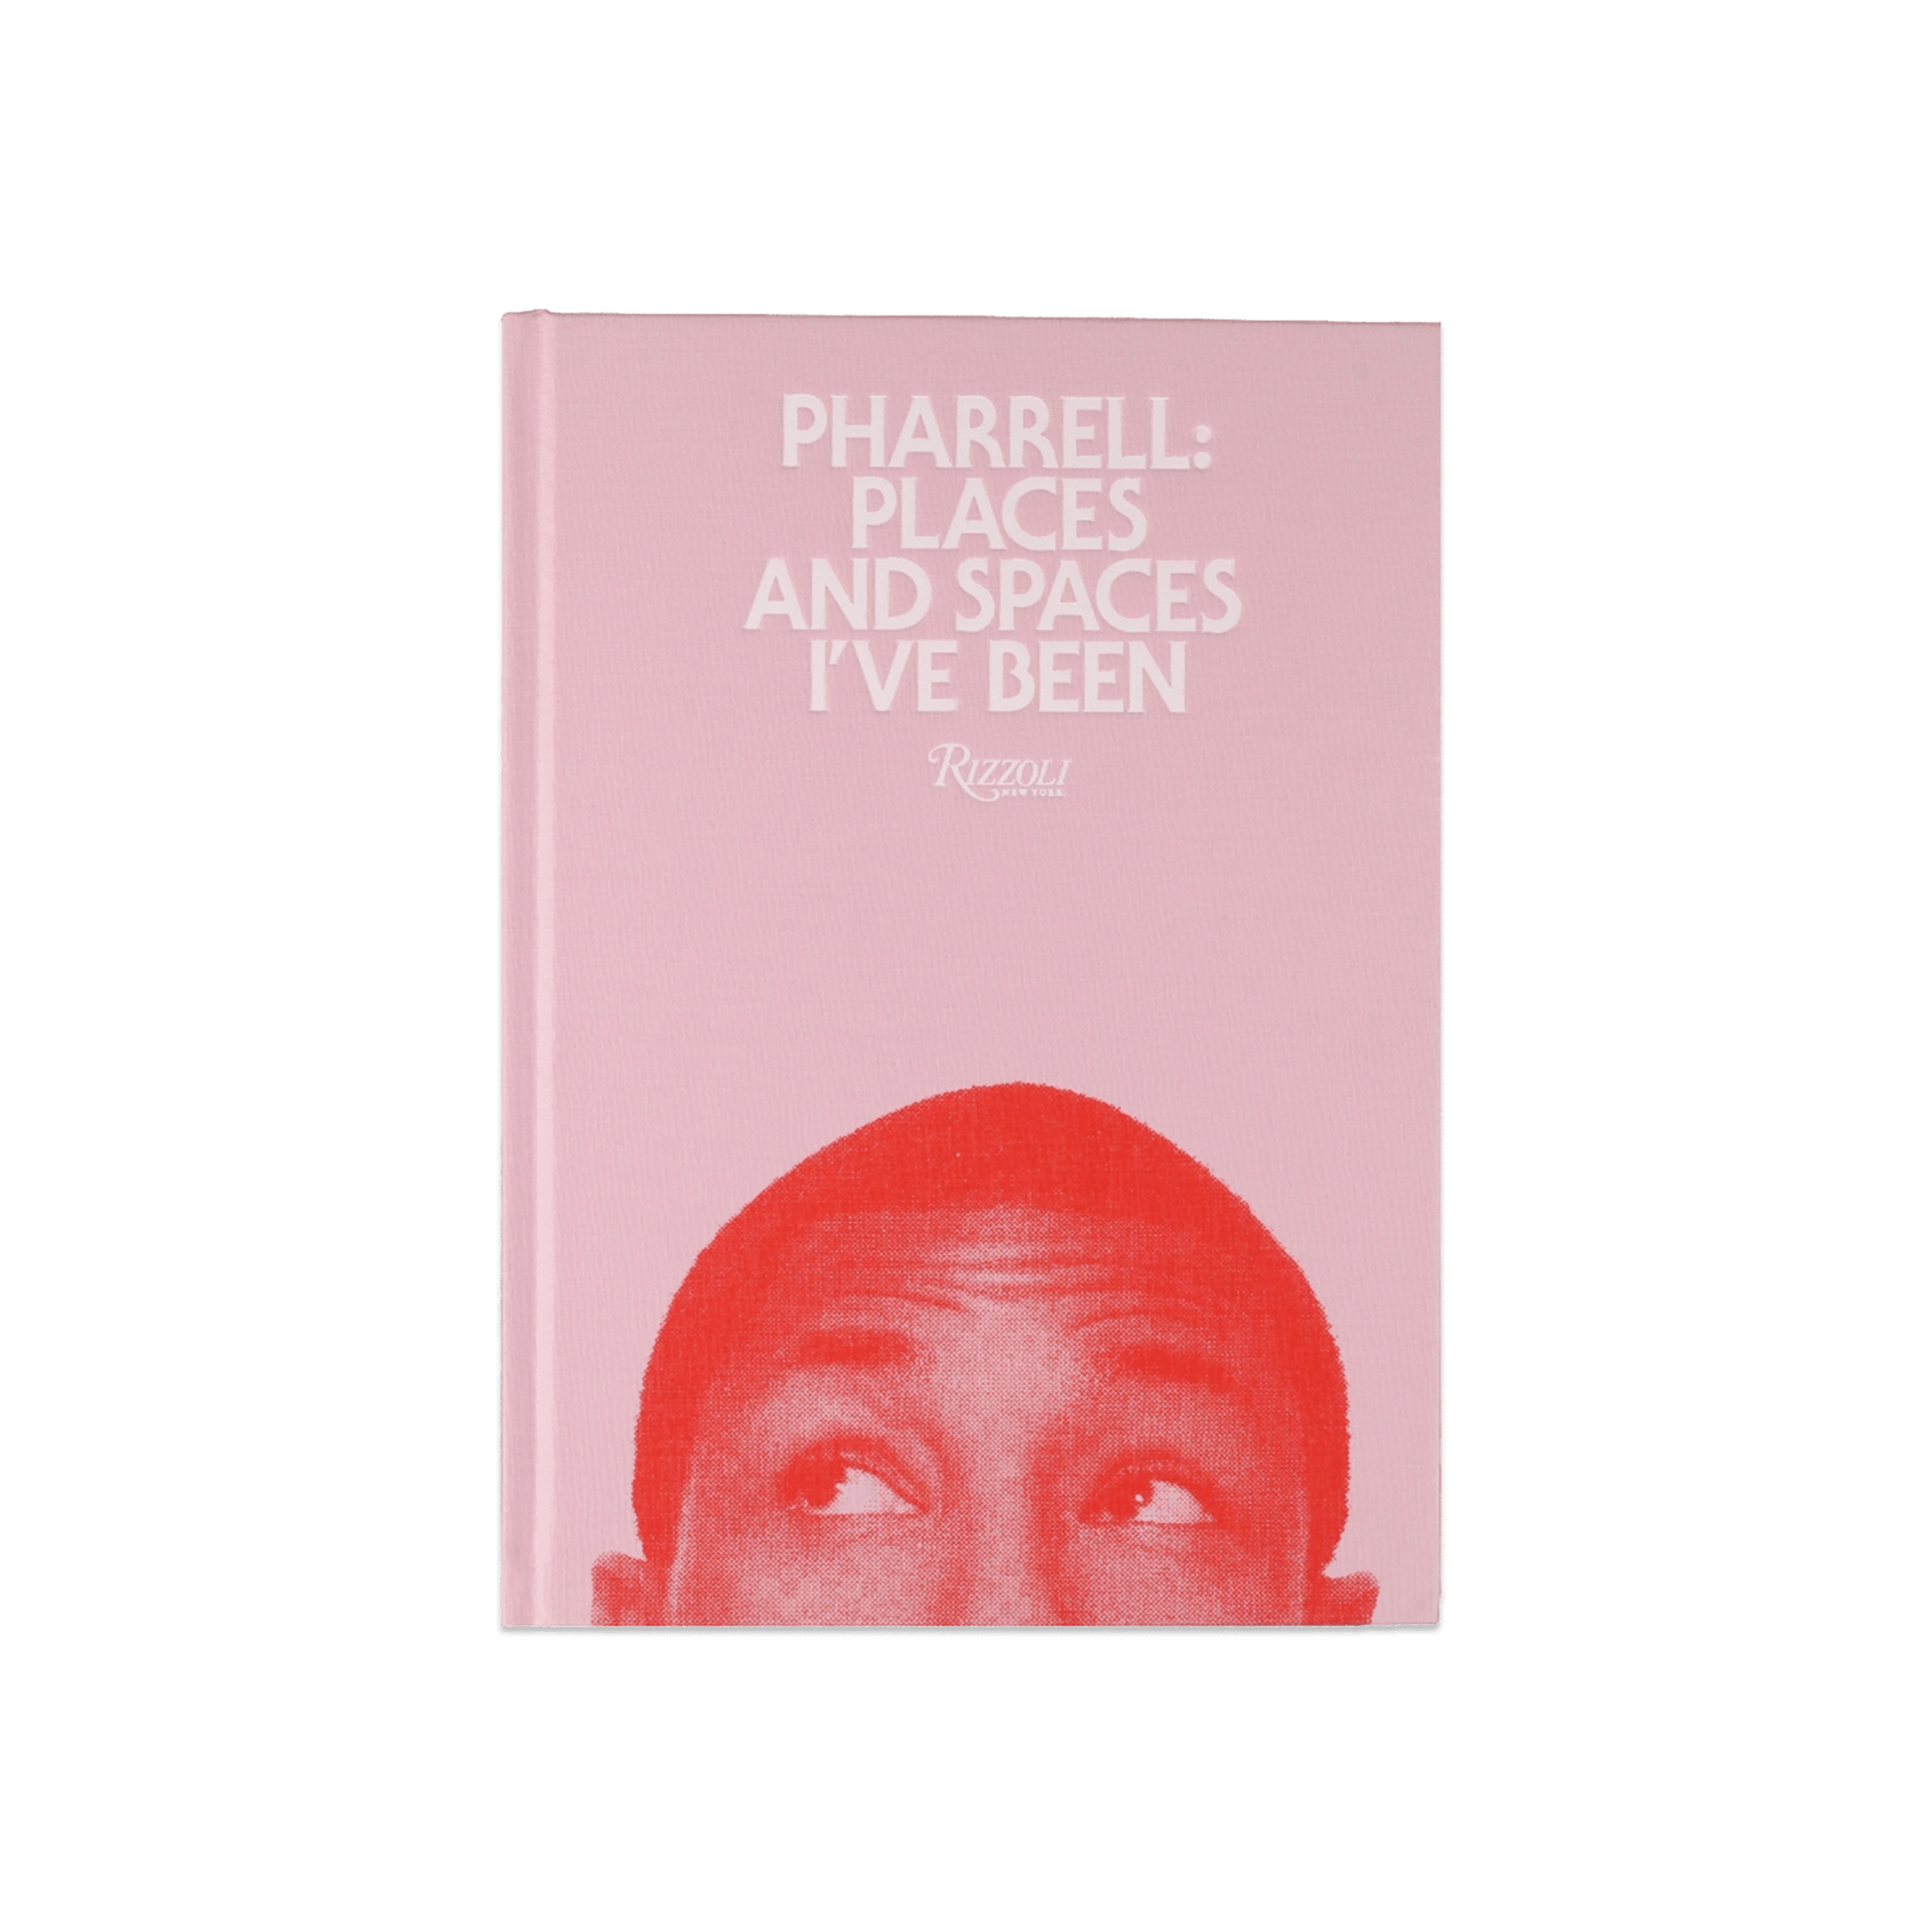 Pharrell: Places and Spaces I've Been - Rizzoli